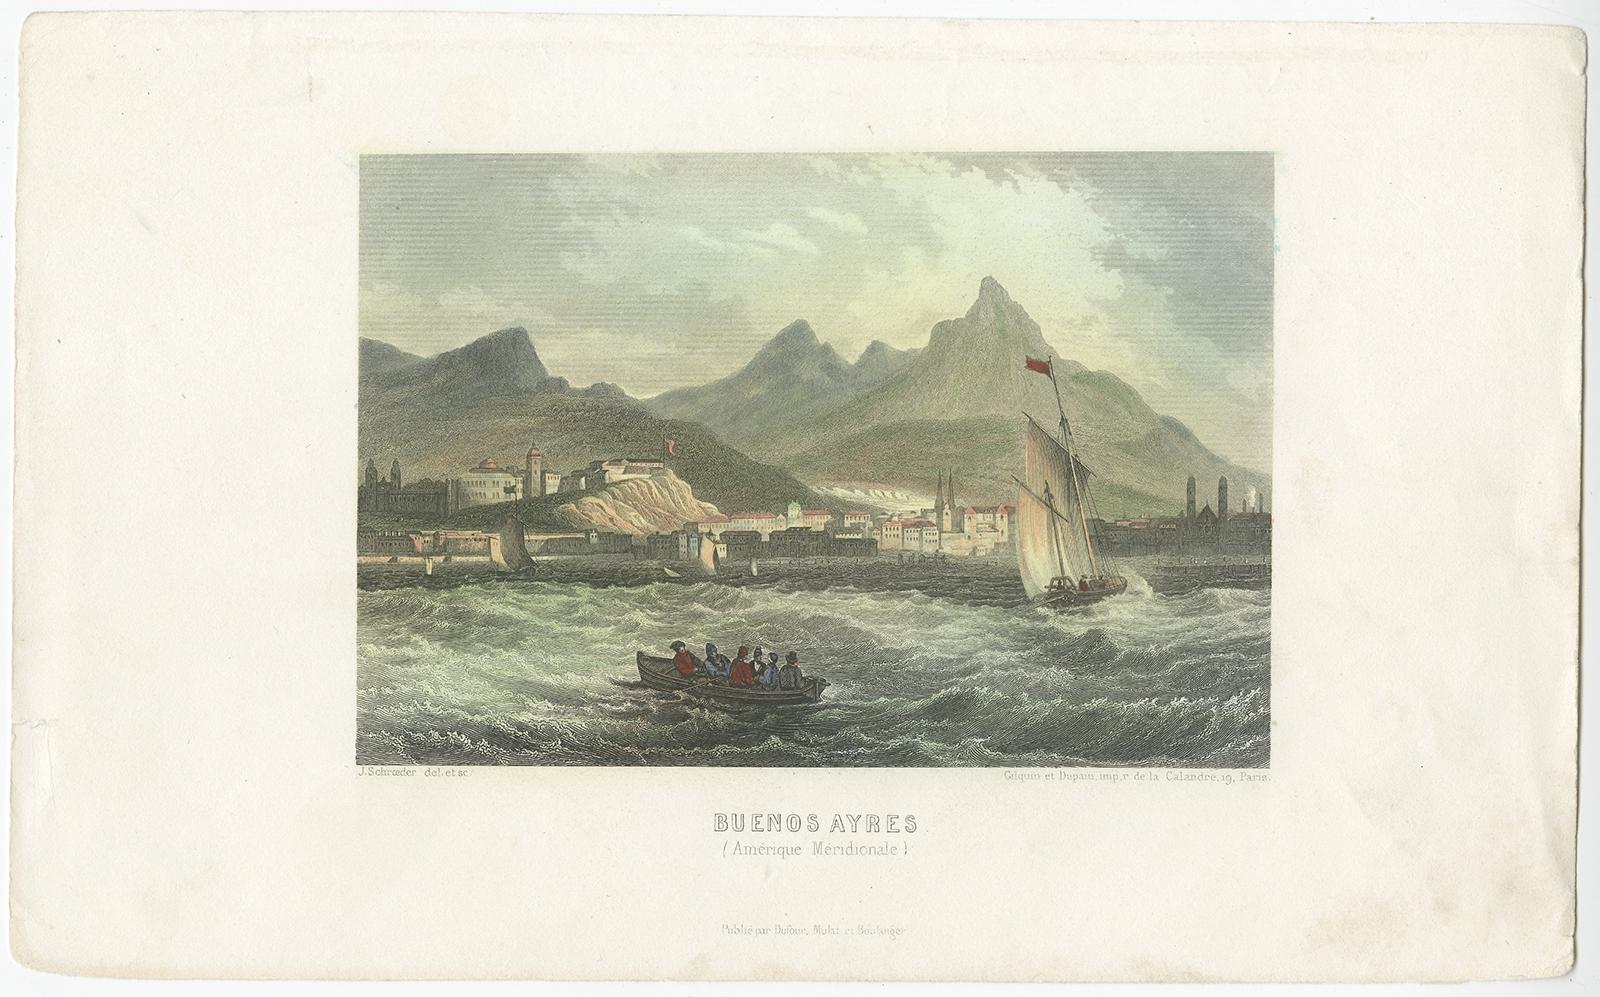 Antique print titled 'Buenos Ayres (Amérique Meridionale)'. 

Steel engraving with a view looking from the Rio de la Plata towards Buenos Aires, Argentina. 

Artists and Engravers: Engraved by Gilquin and Dupain after Schroeder. Published by